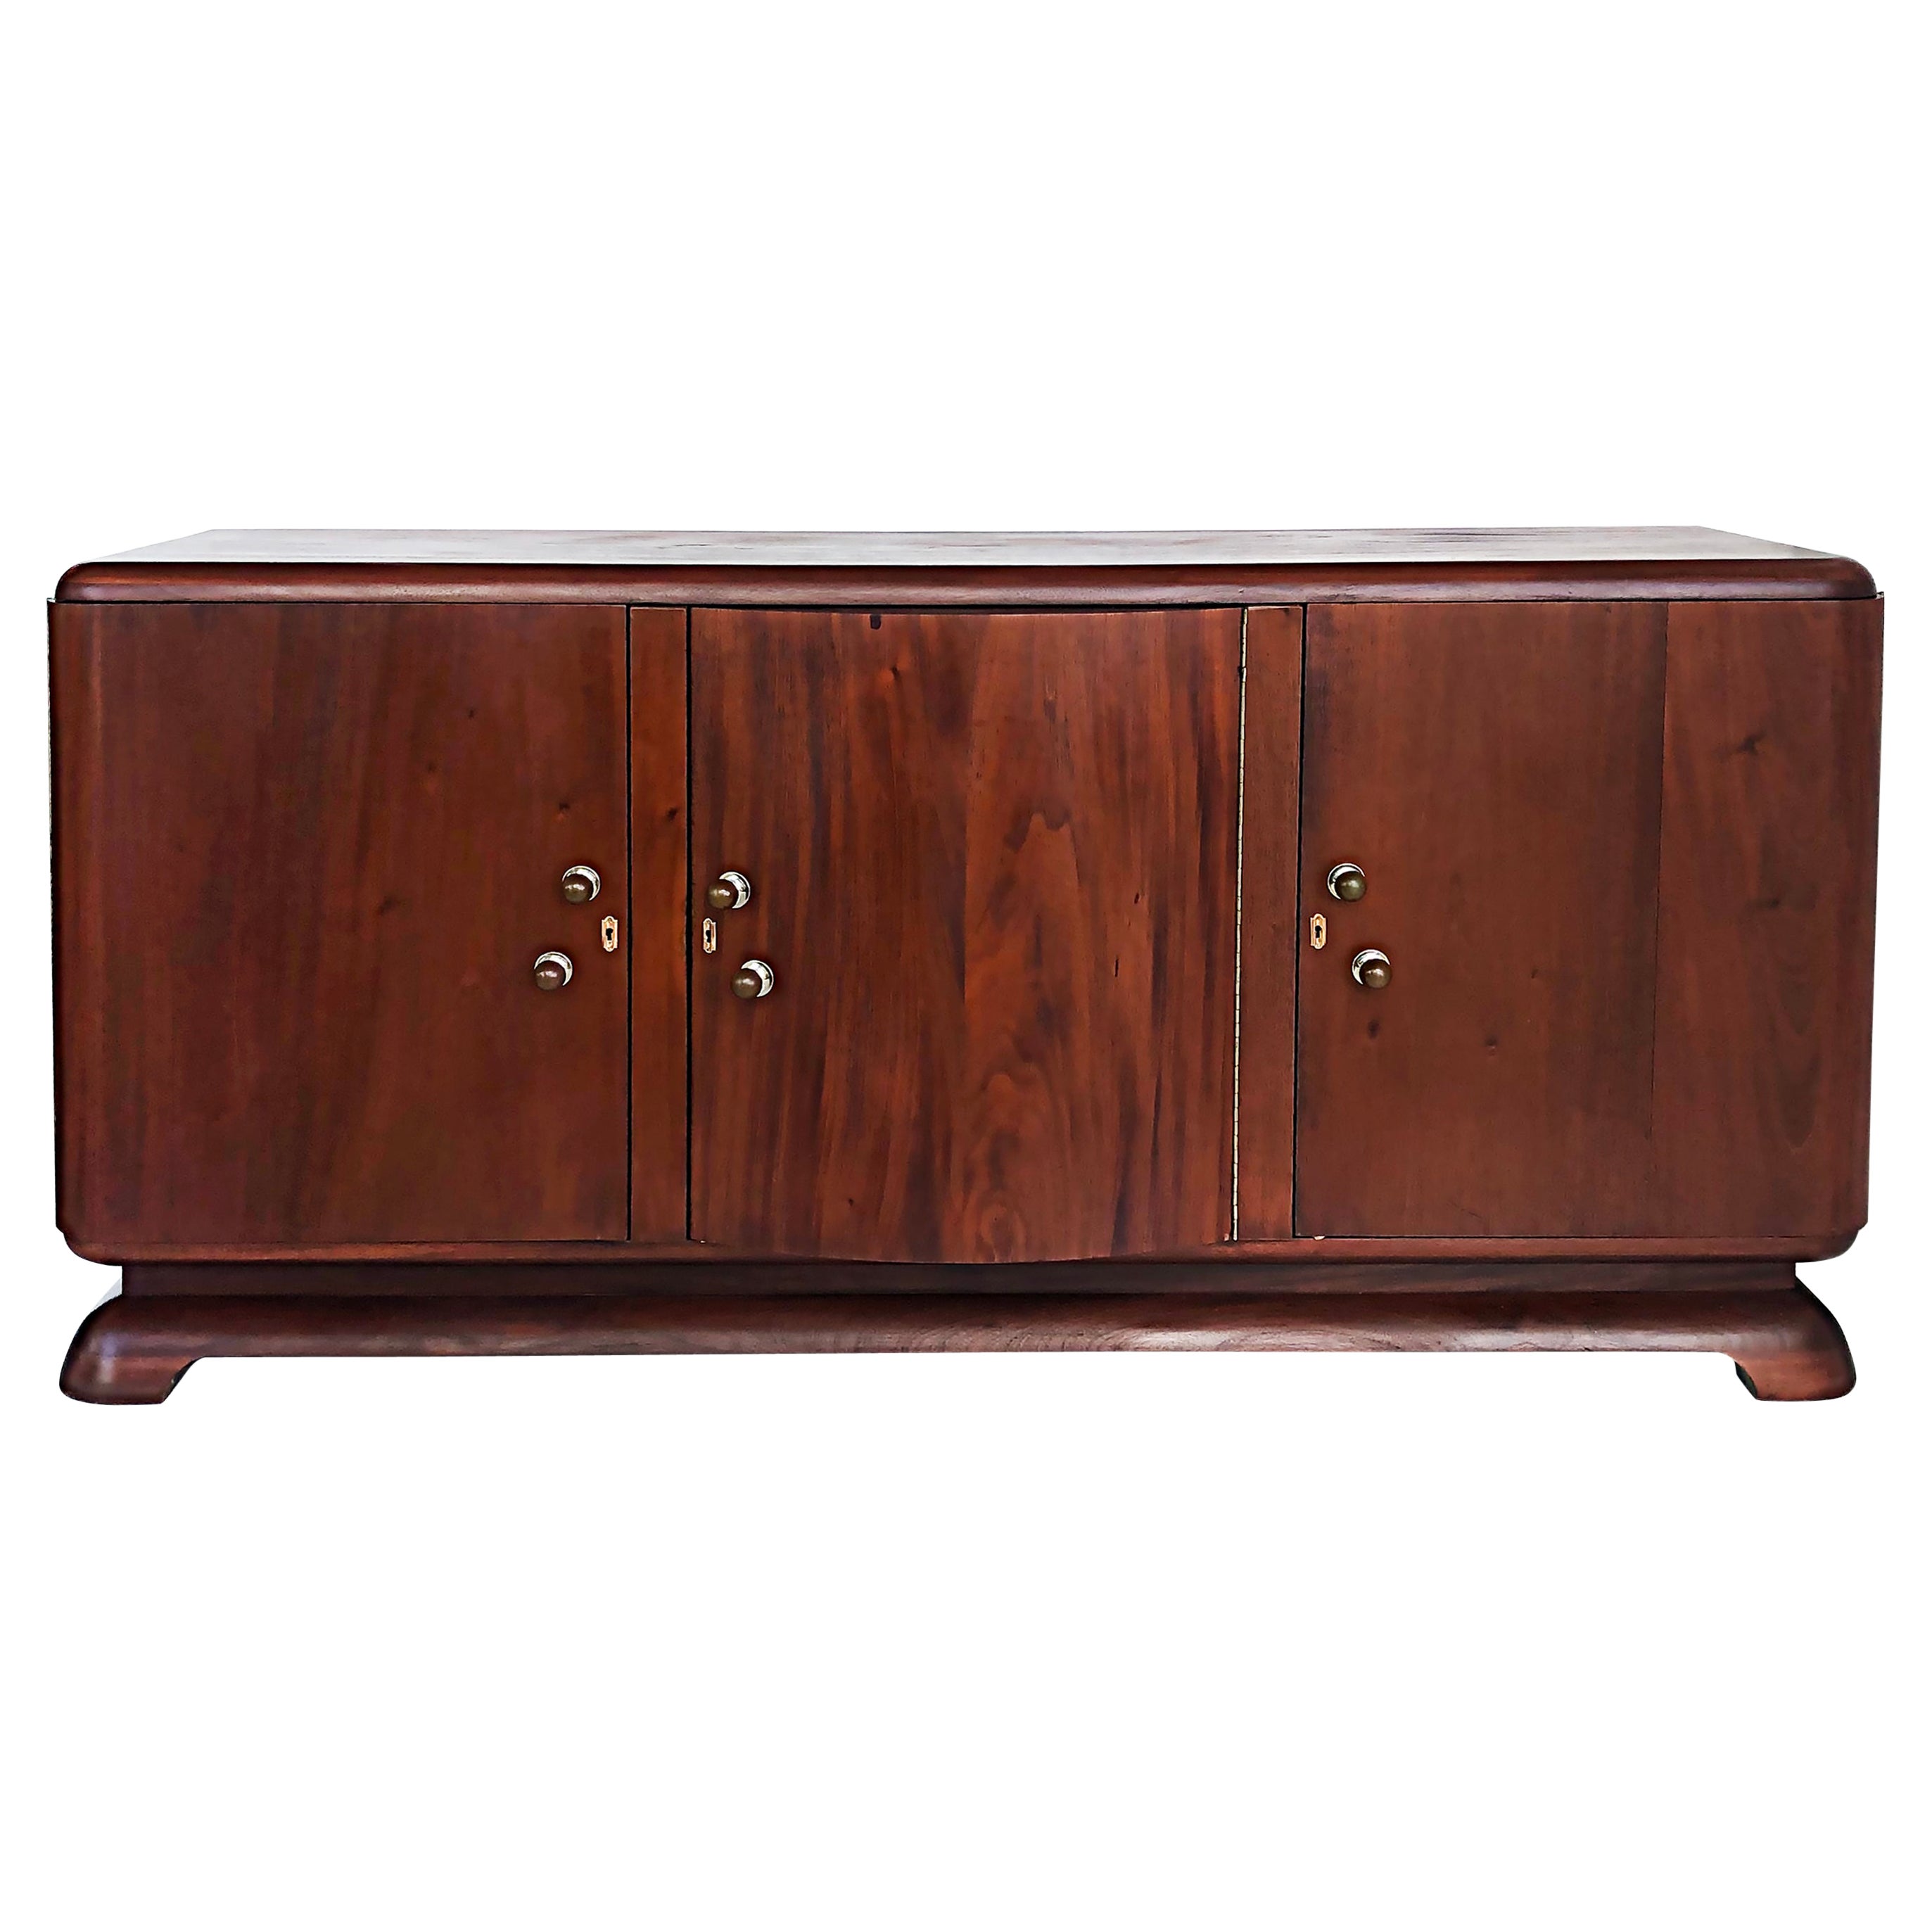 Restored 1940s French Art Deco Sideboard